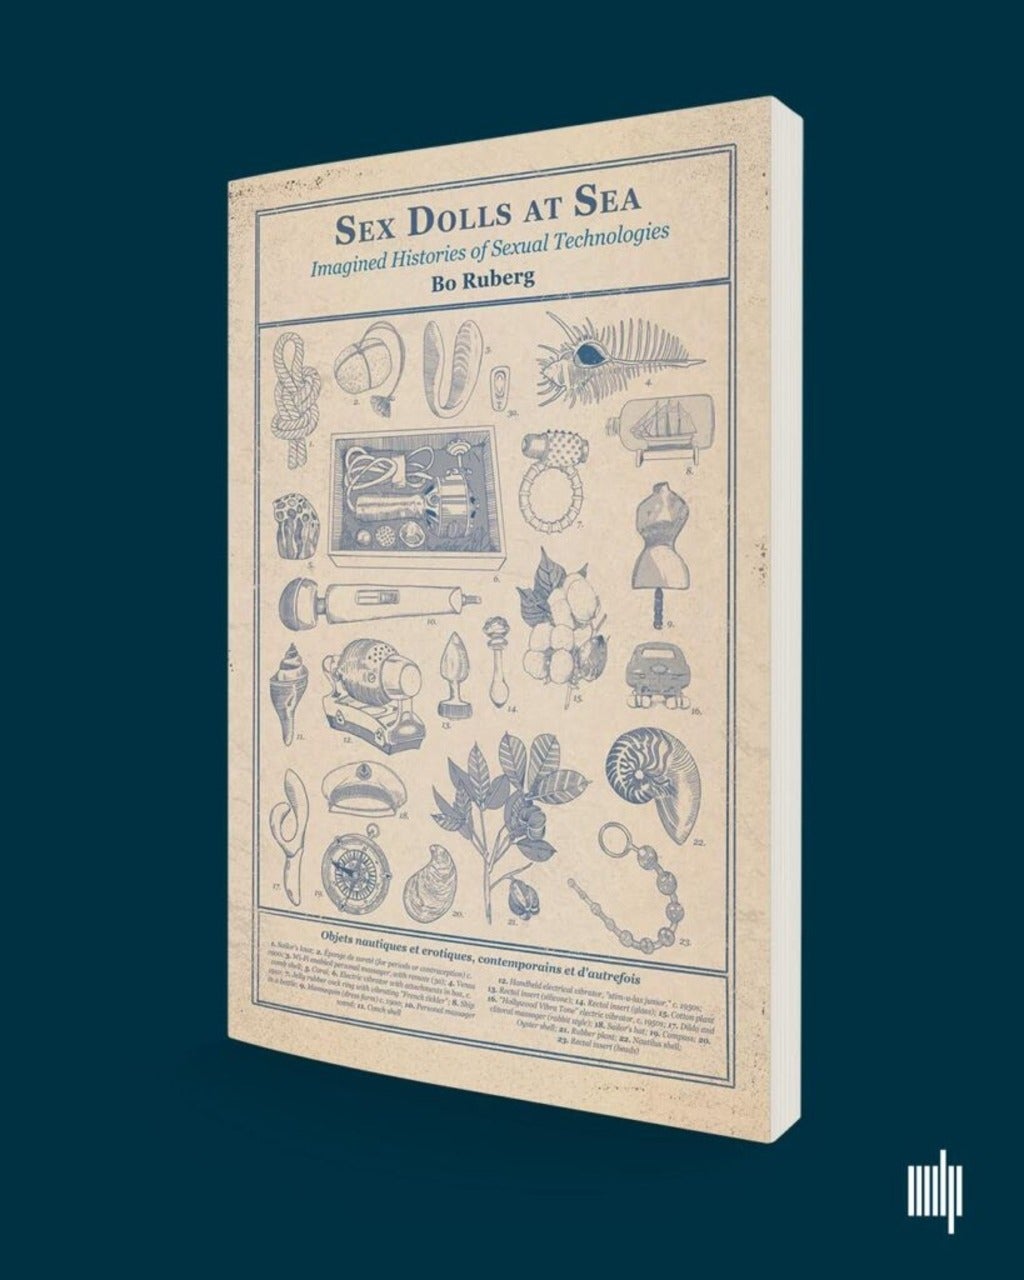 The cover of Ruberg's book featurring detailed line drawings of both sea shells and sex tech